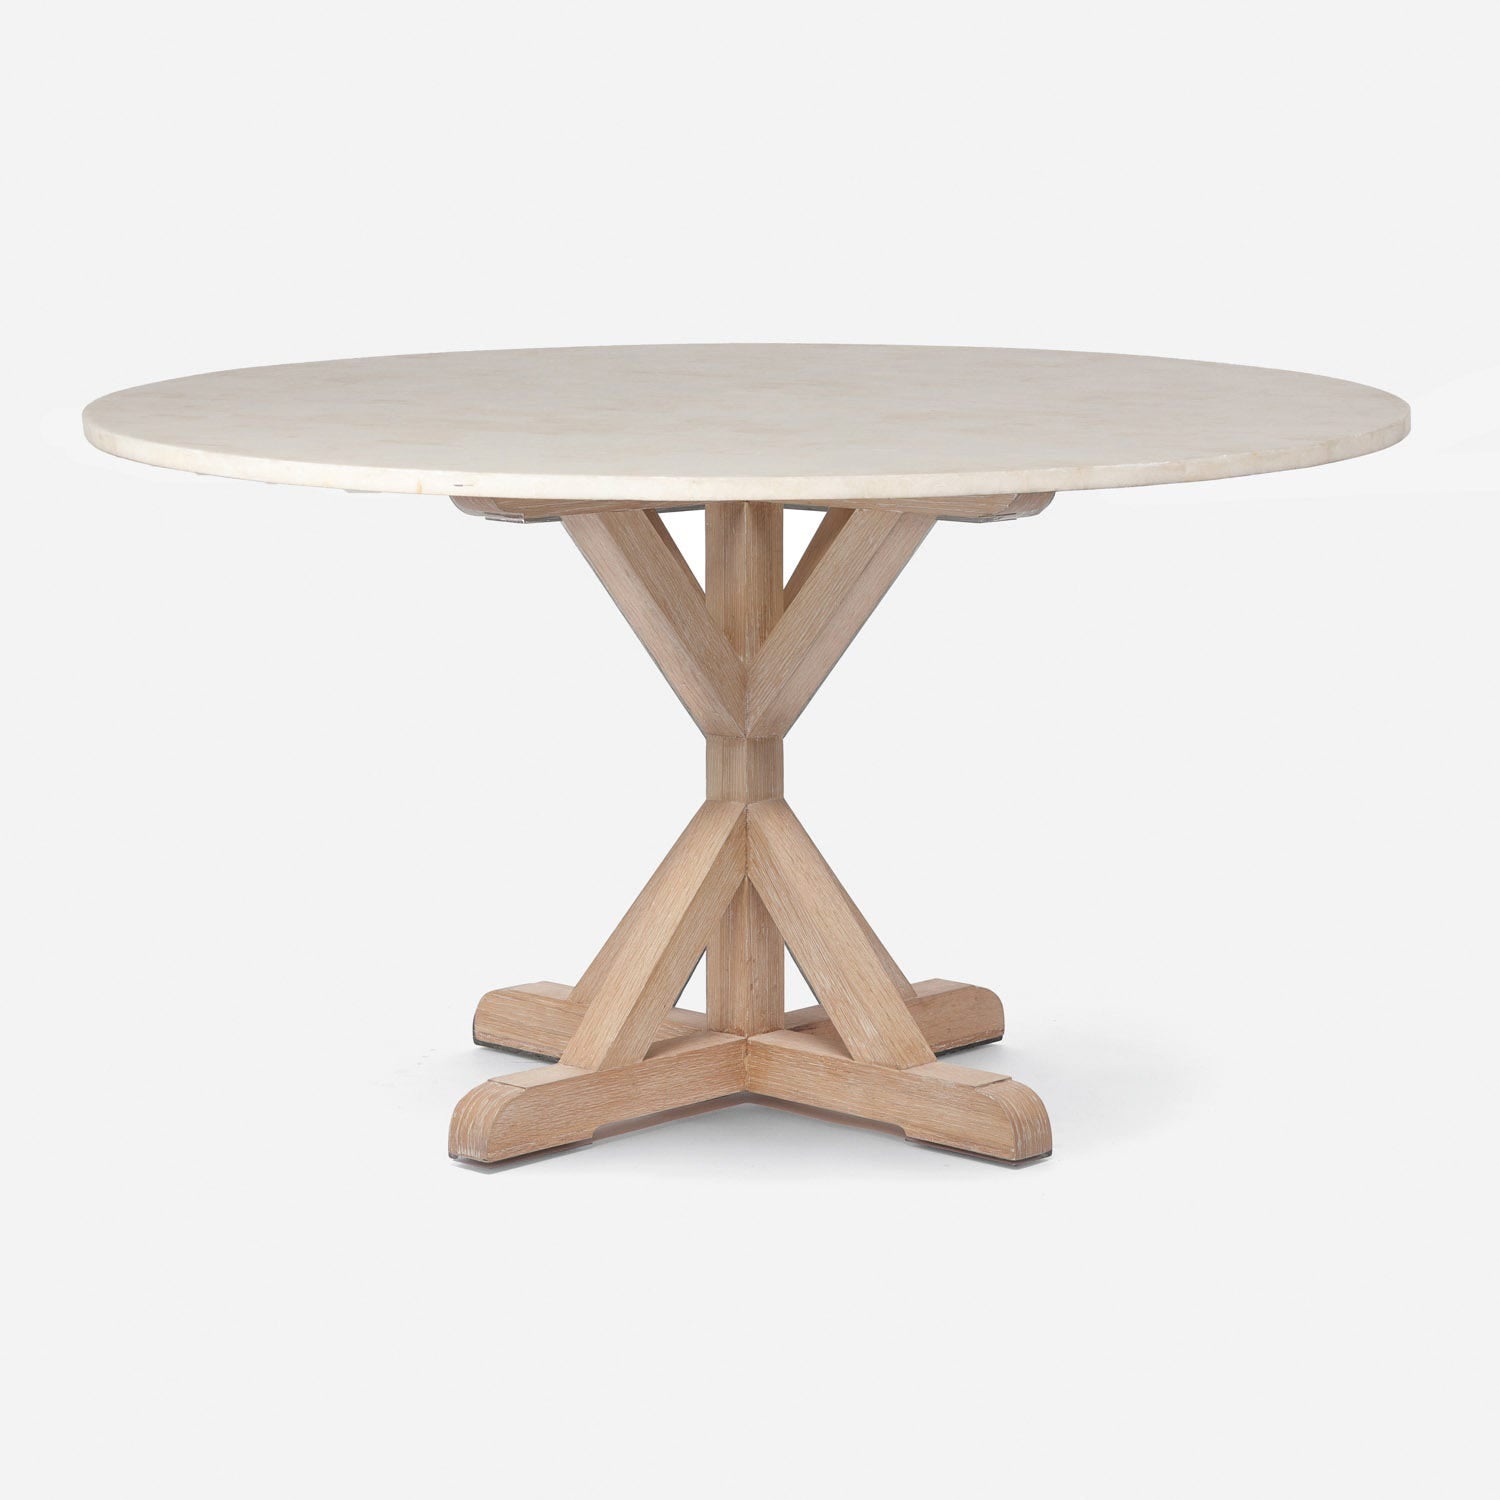 Made Goods Dane 60" x 30" White Cerused Oak Dinning Table With Round Ice Crystal Stone Table Top